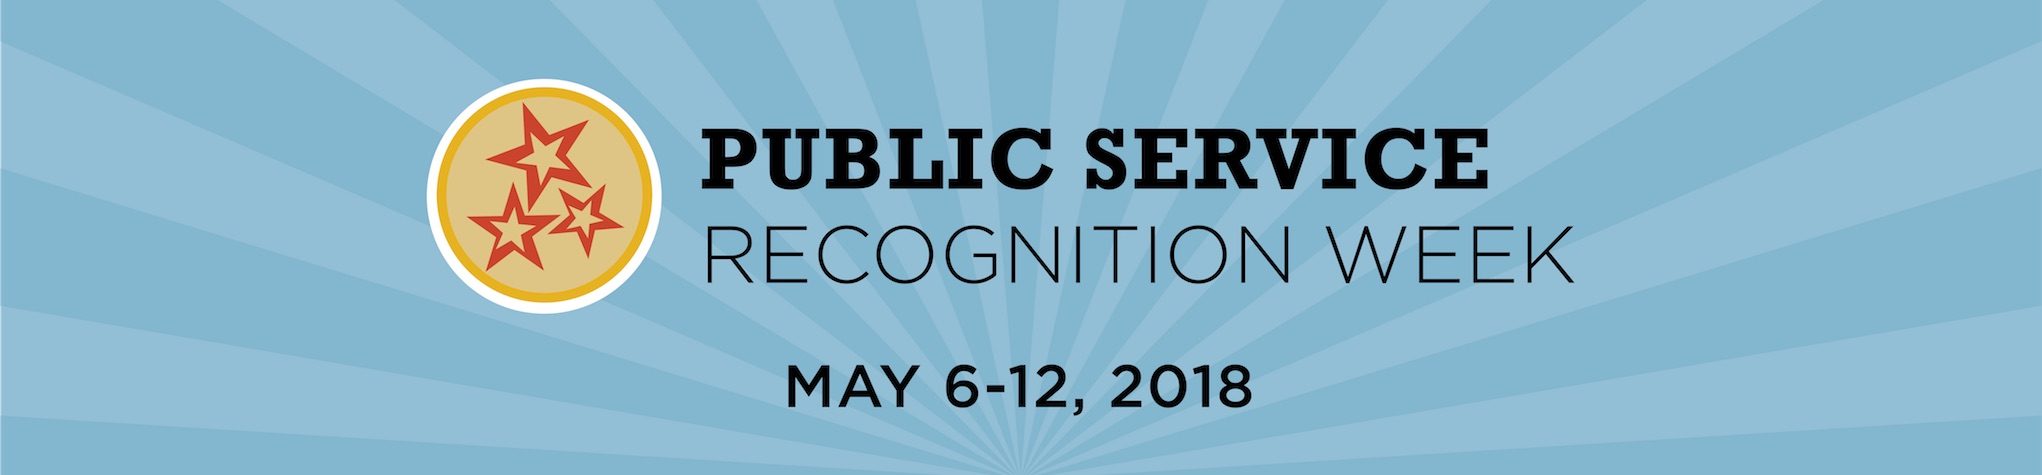 Featured image for “Public Service Recognition Week”